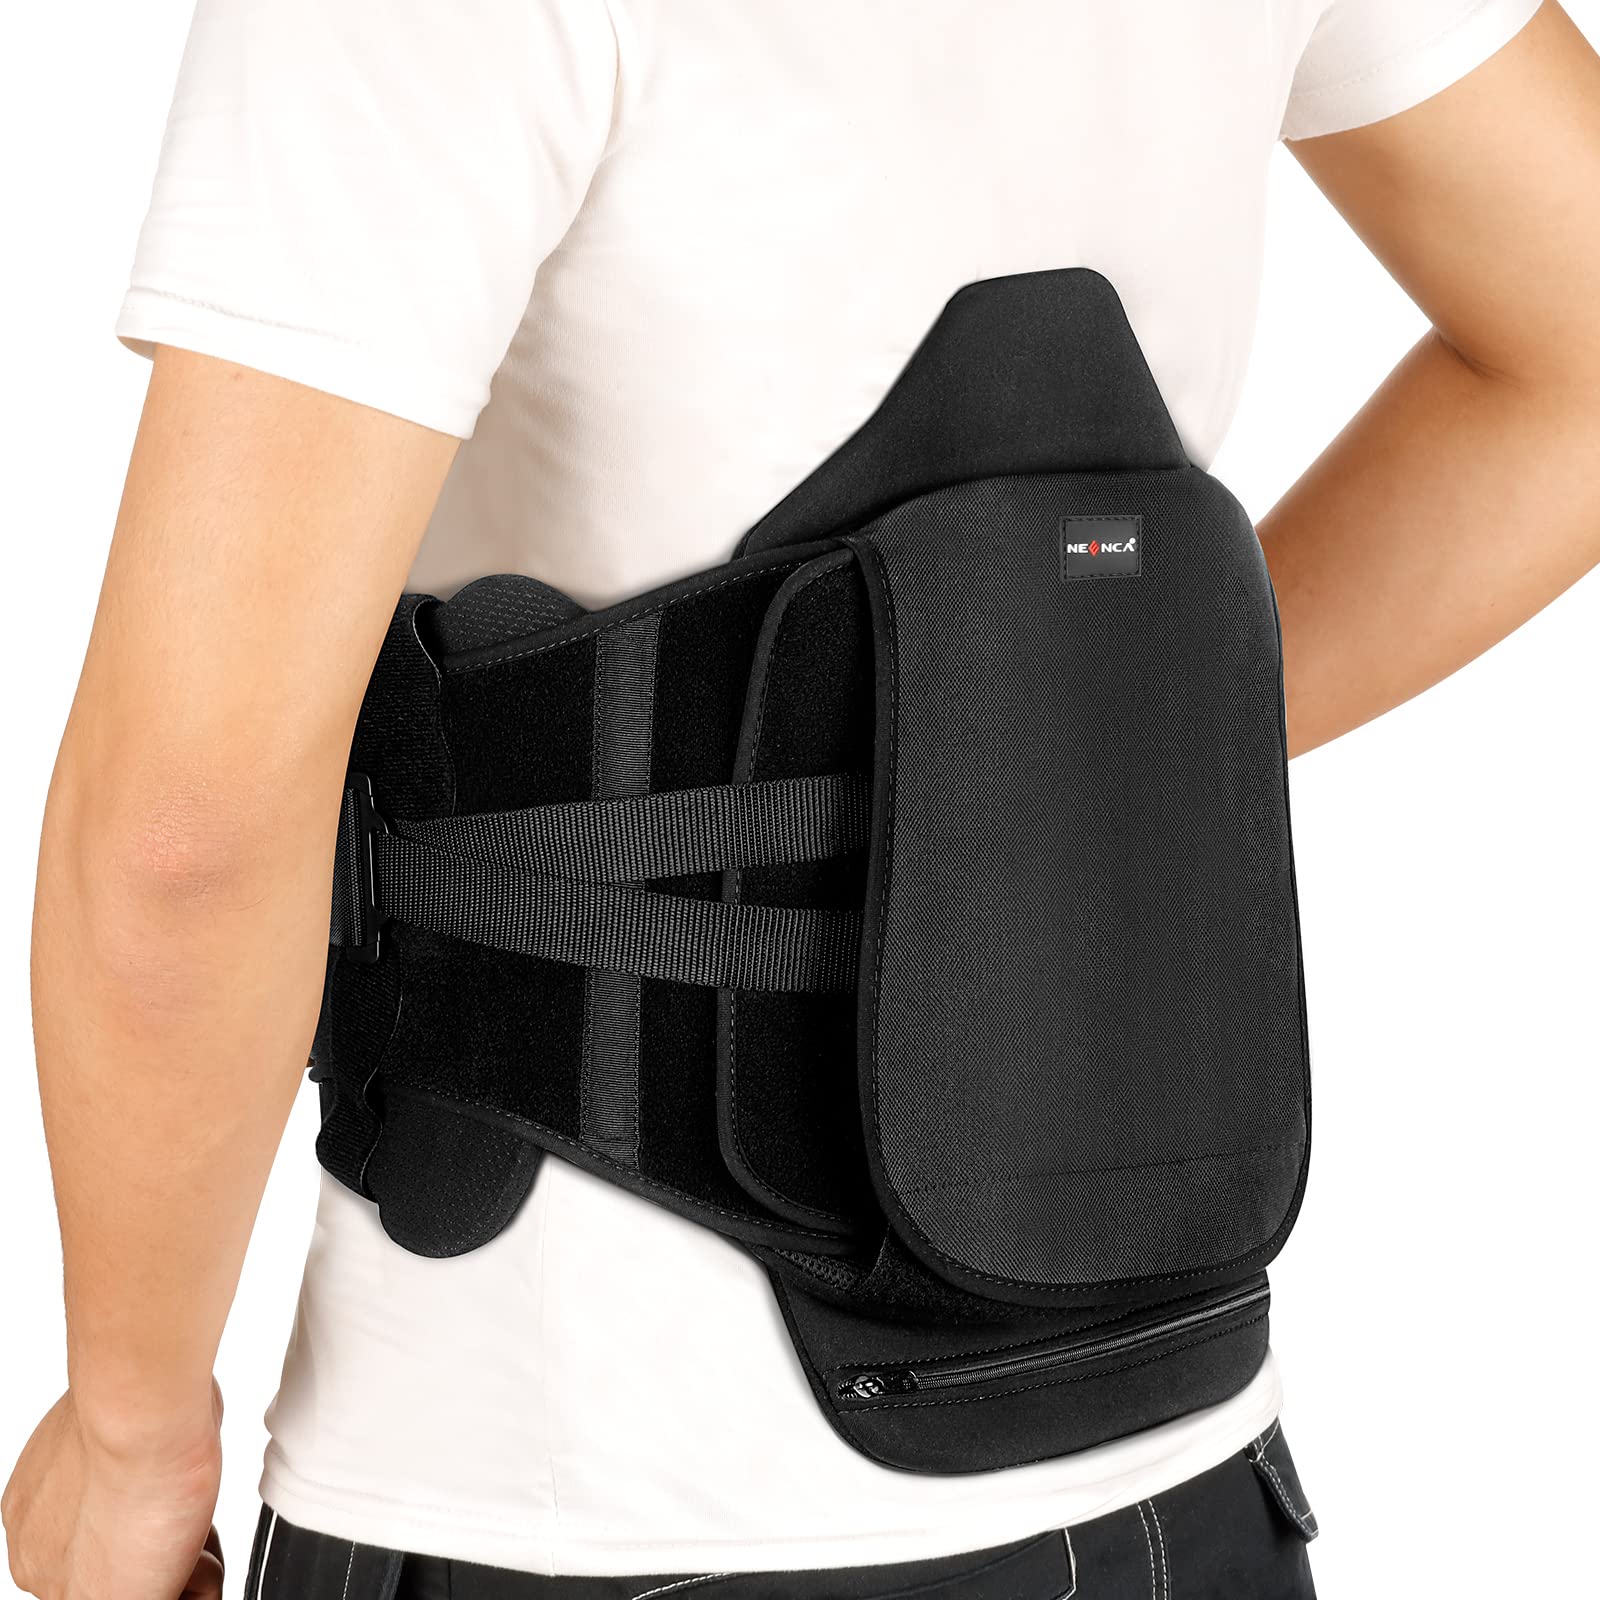 NEENCA Back Support Brace, Adjustable Lumbar Support for Pain Relief of  Back/Lumbar/Waist, Waist Wrap with Spring Stabilizers for Injury, Herniated